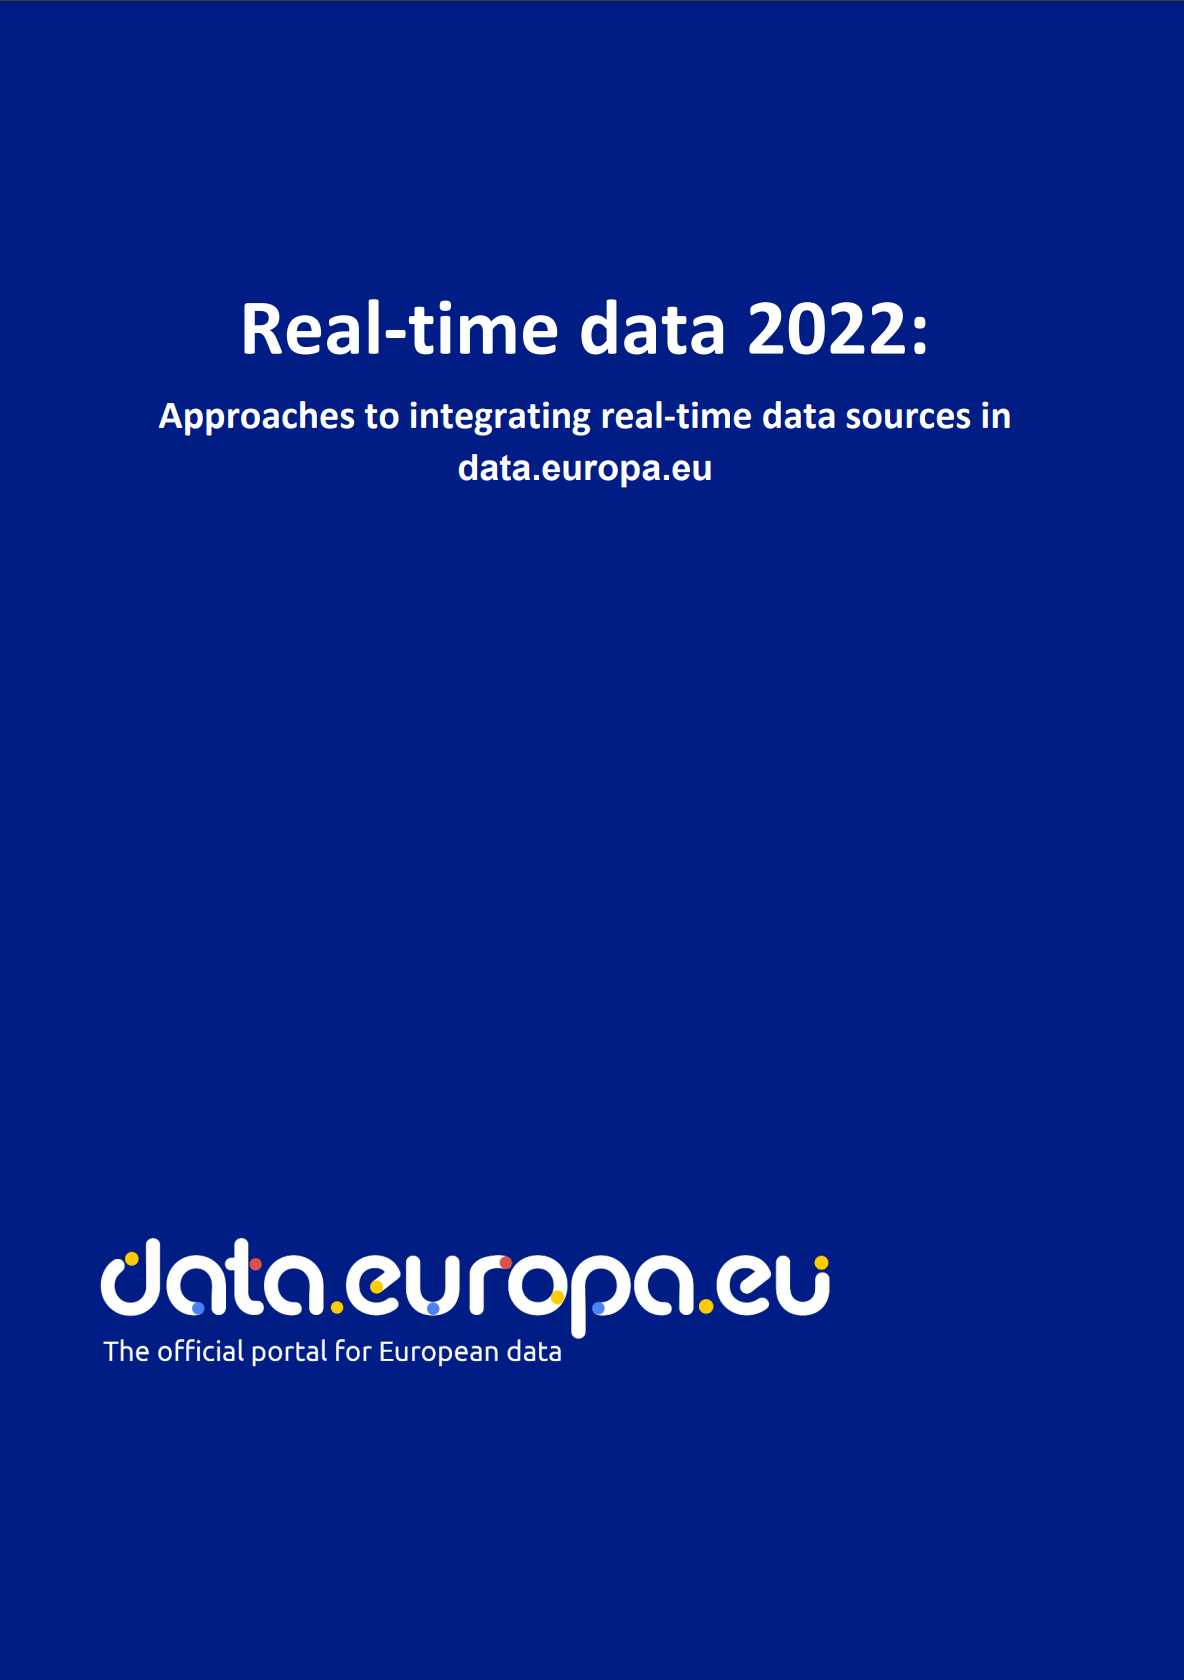 Real-time data 2022: Approaches to integrating real-time data sources in data.europa.eu